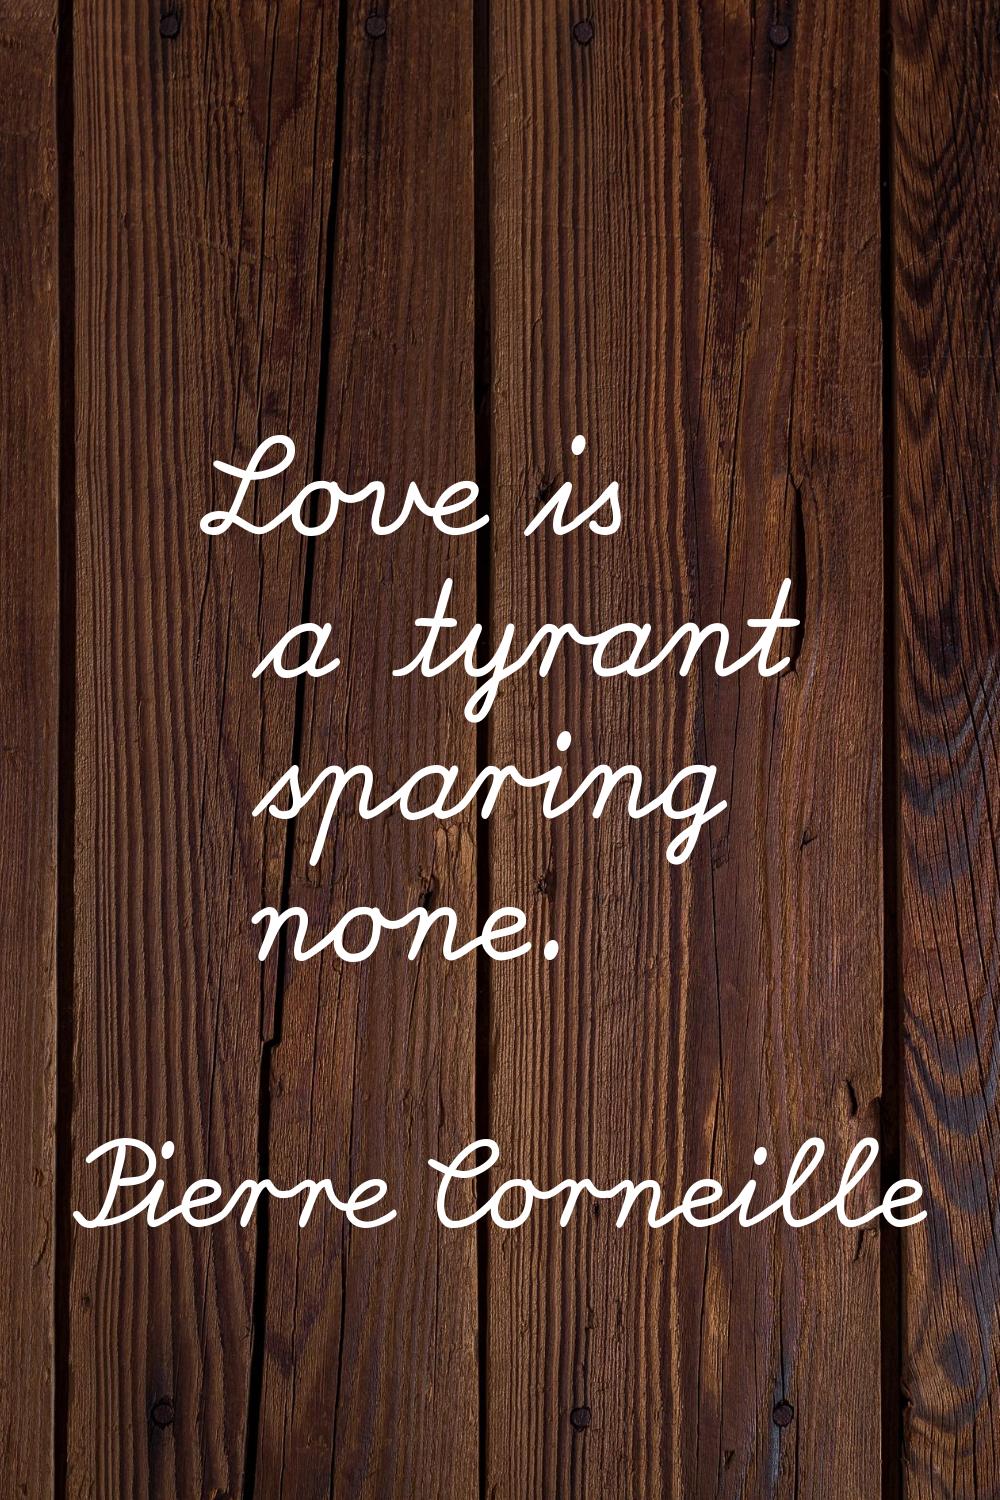 Love is a tyrant sparing none.